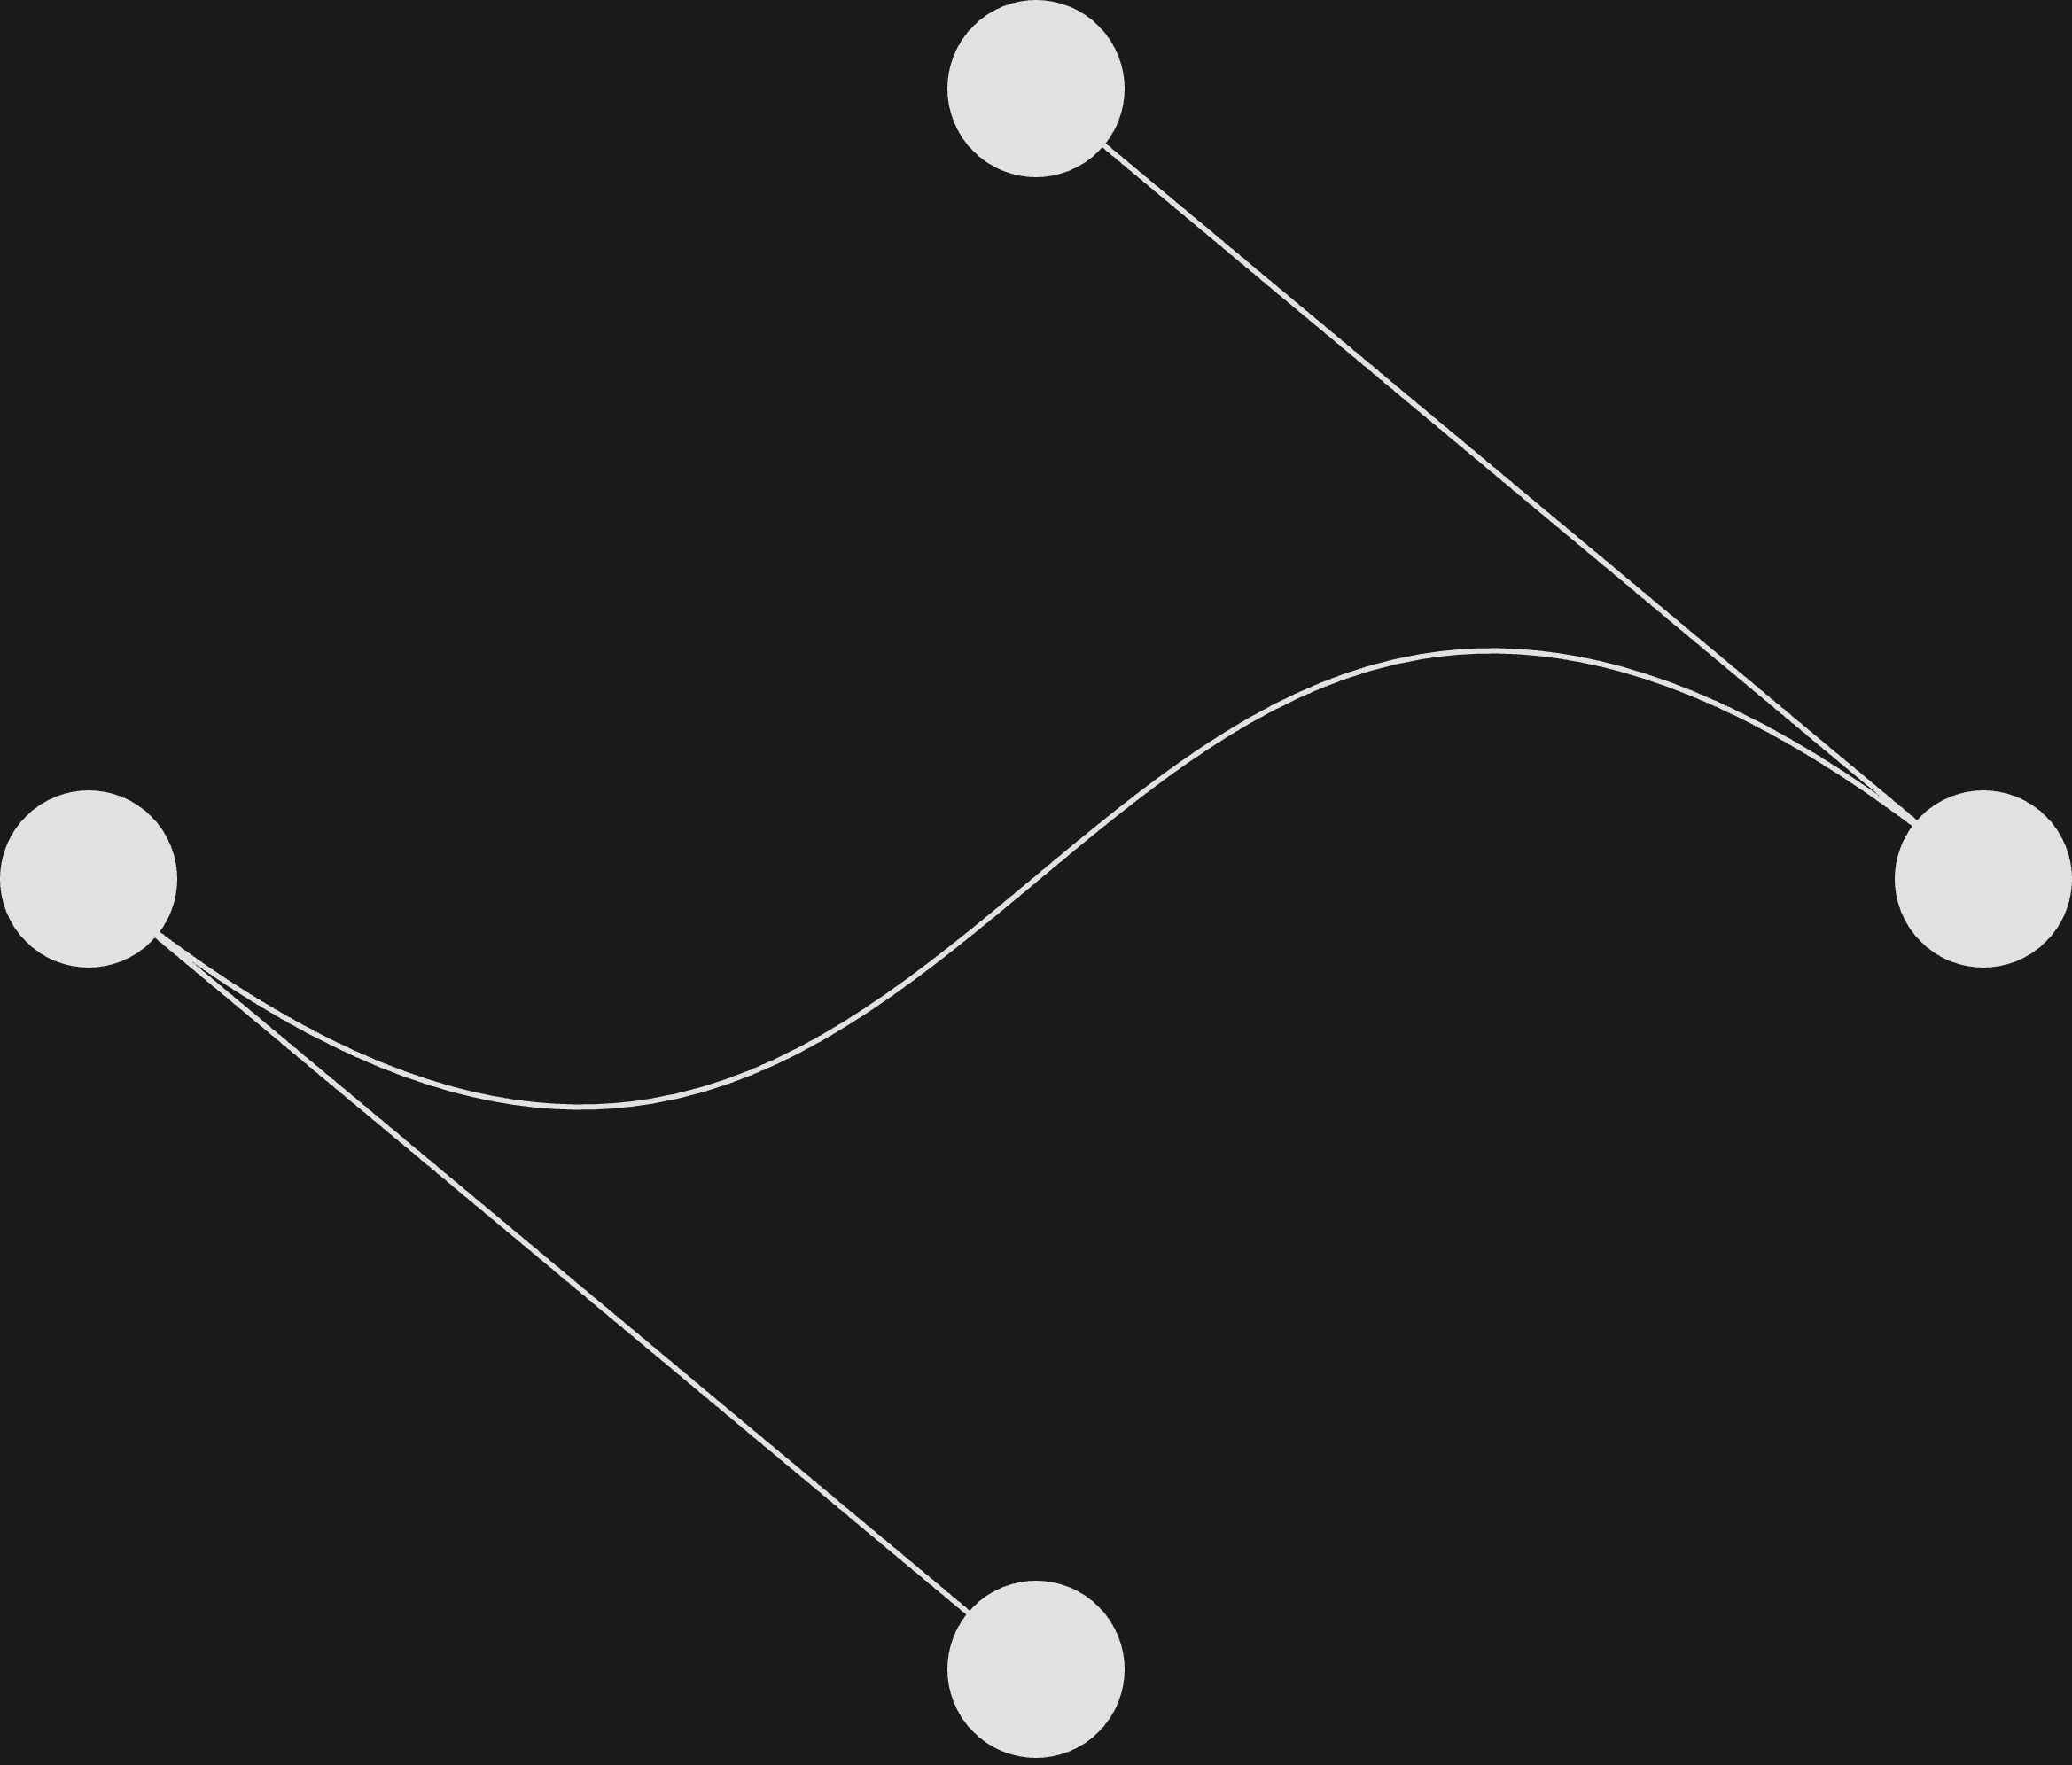 a bezier curve drawn on an html canvas with the control points shown.